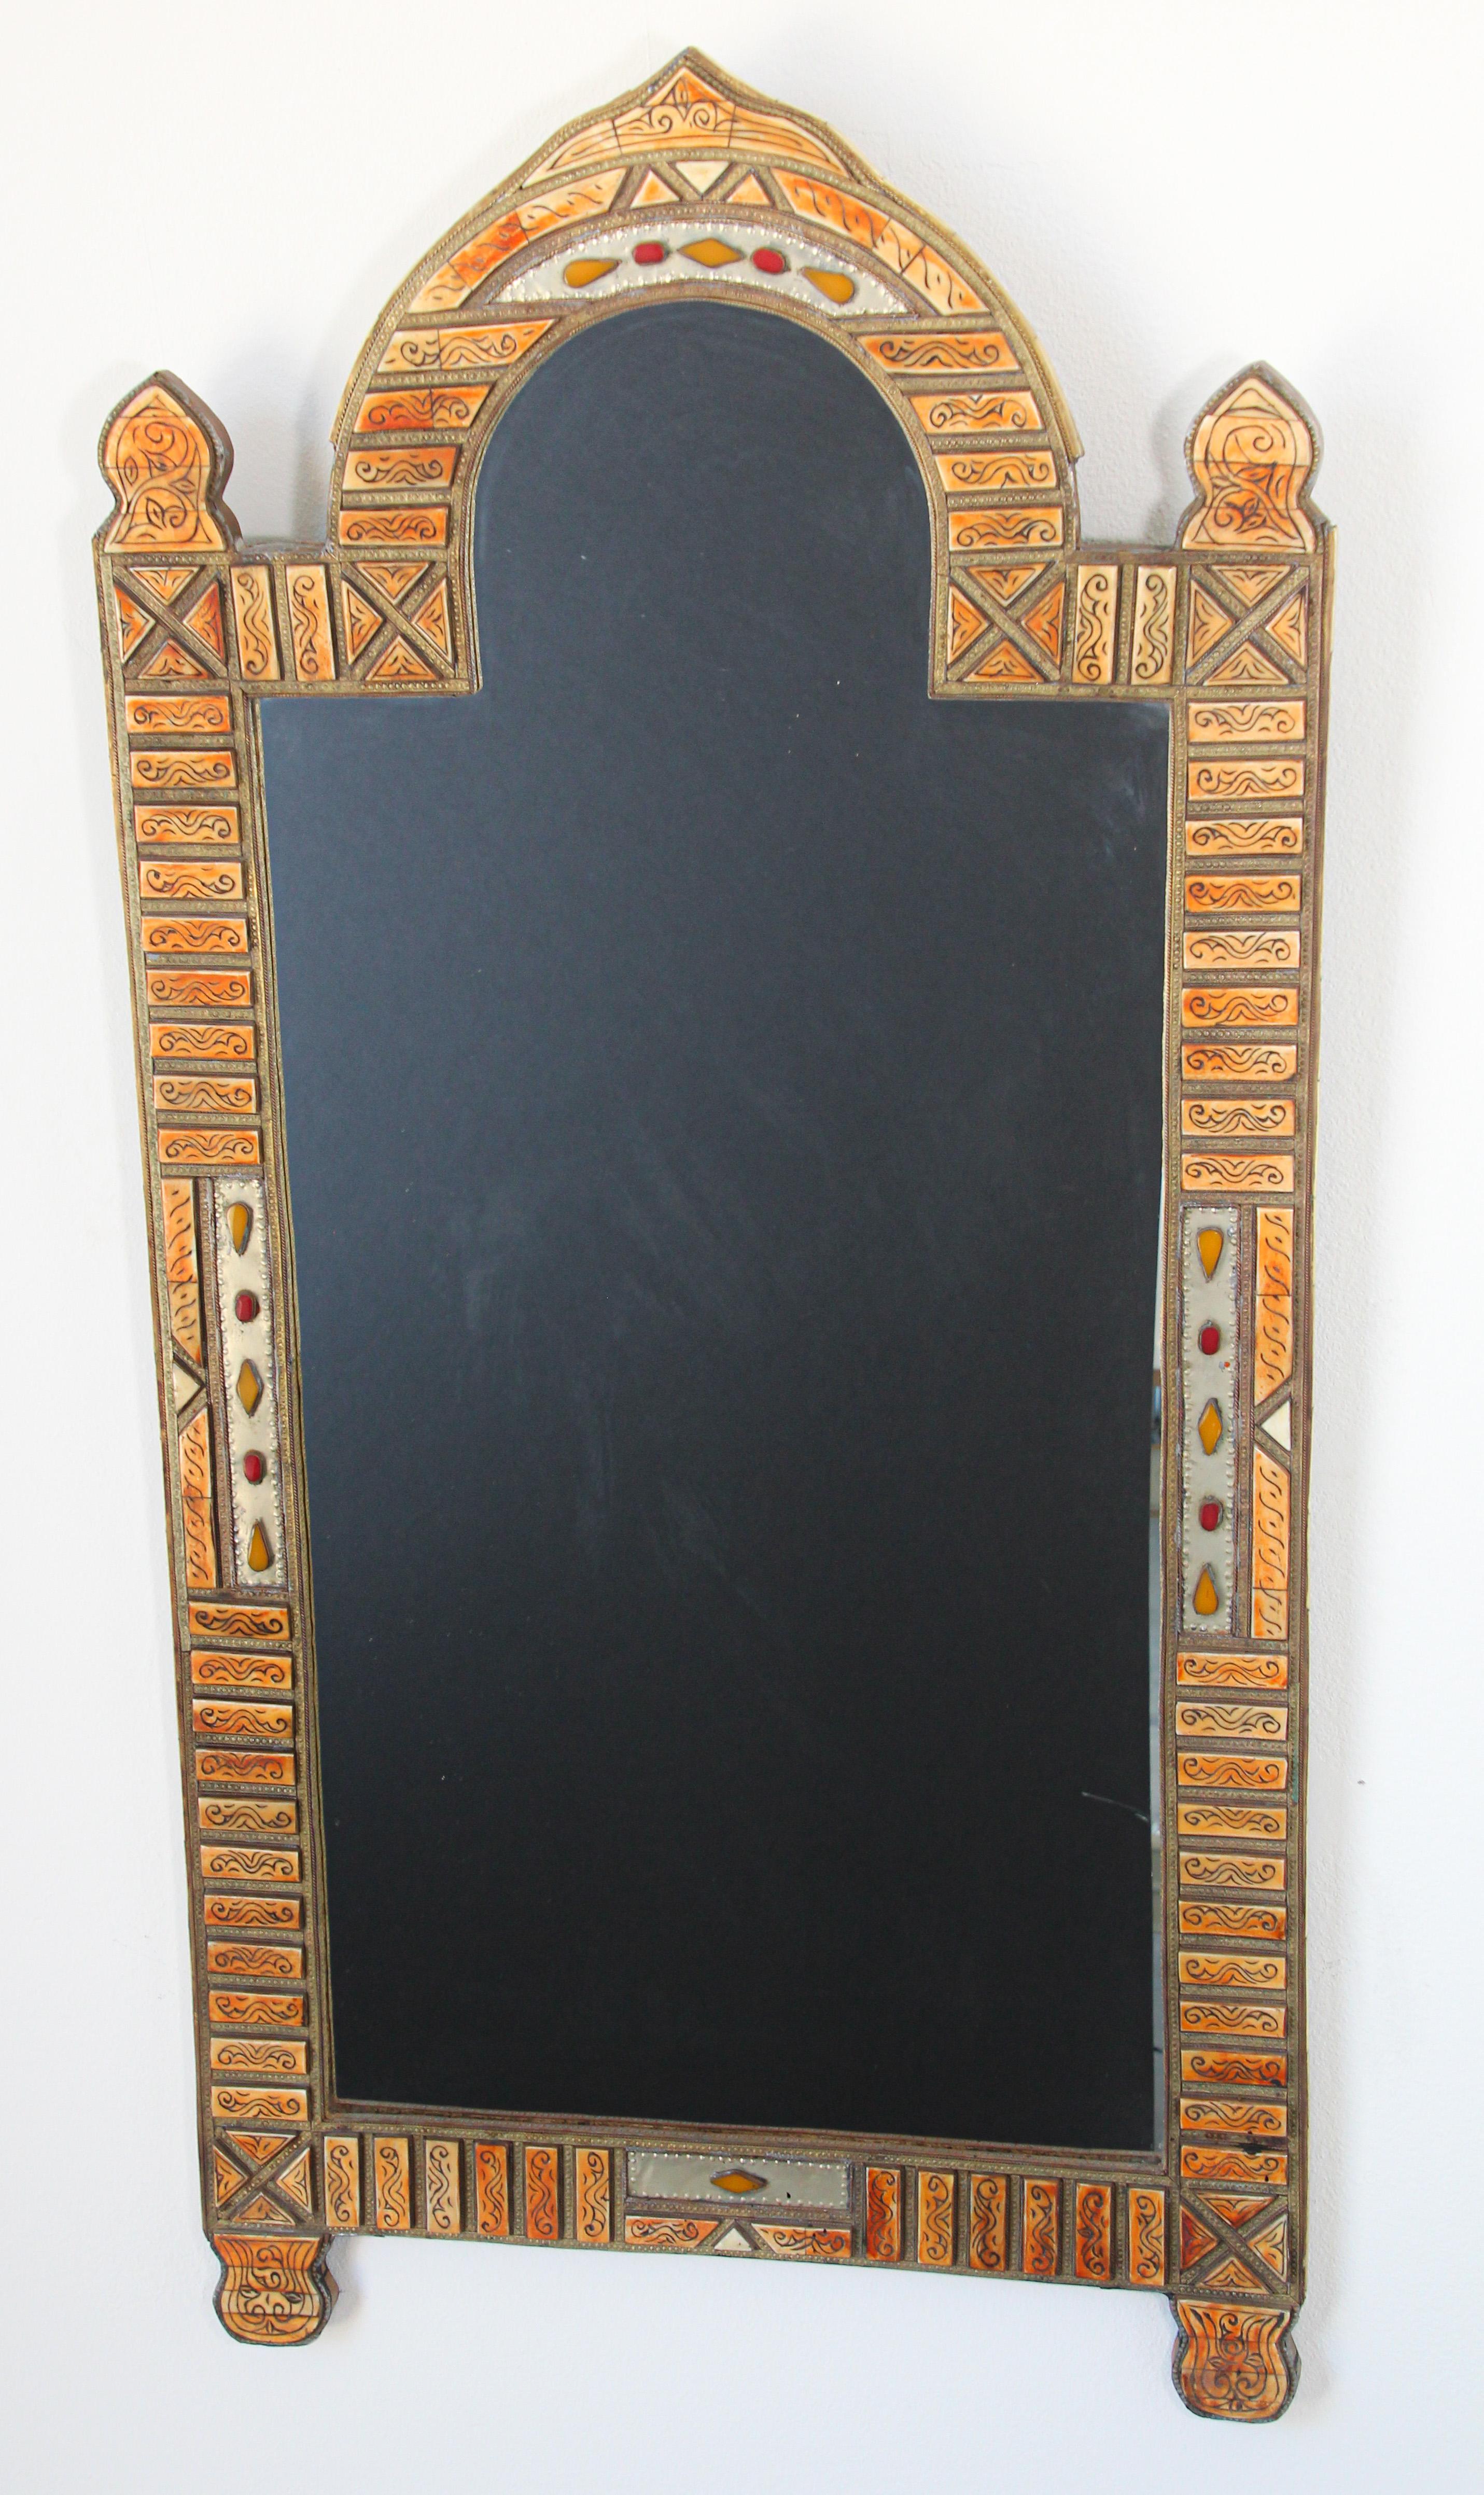 Large Moroccan mirror with brass embossed metal.
Vintage Moroccan handcrafted inly bone and brass arched Moorish mirror.
Moroccan mirror inlaid with carved recycled bone and brass embossed metal, intricately worked with classic elements of Moorish